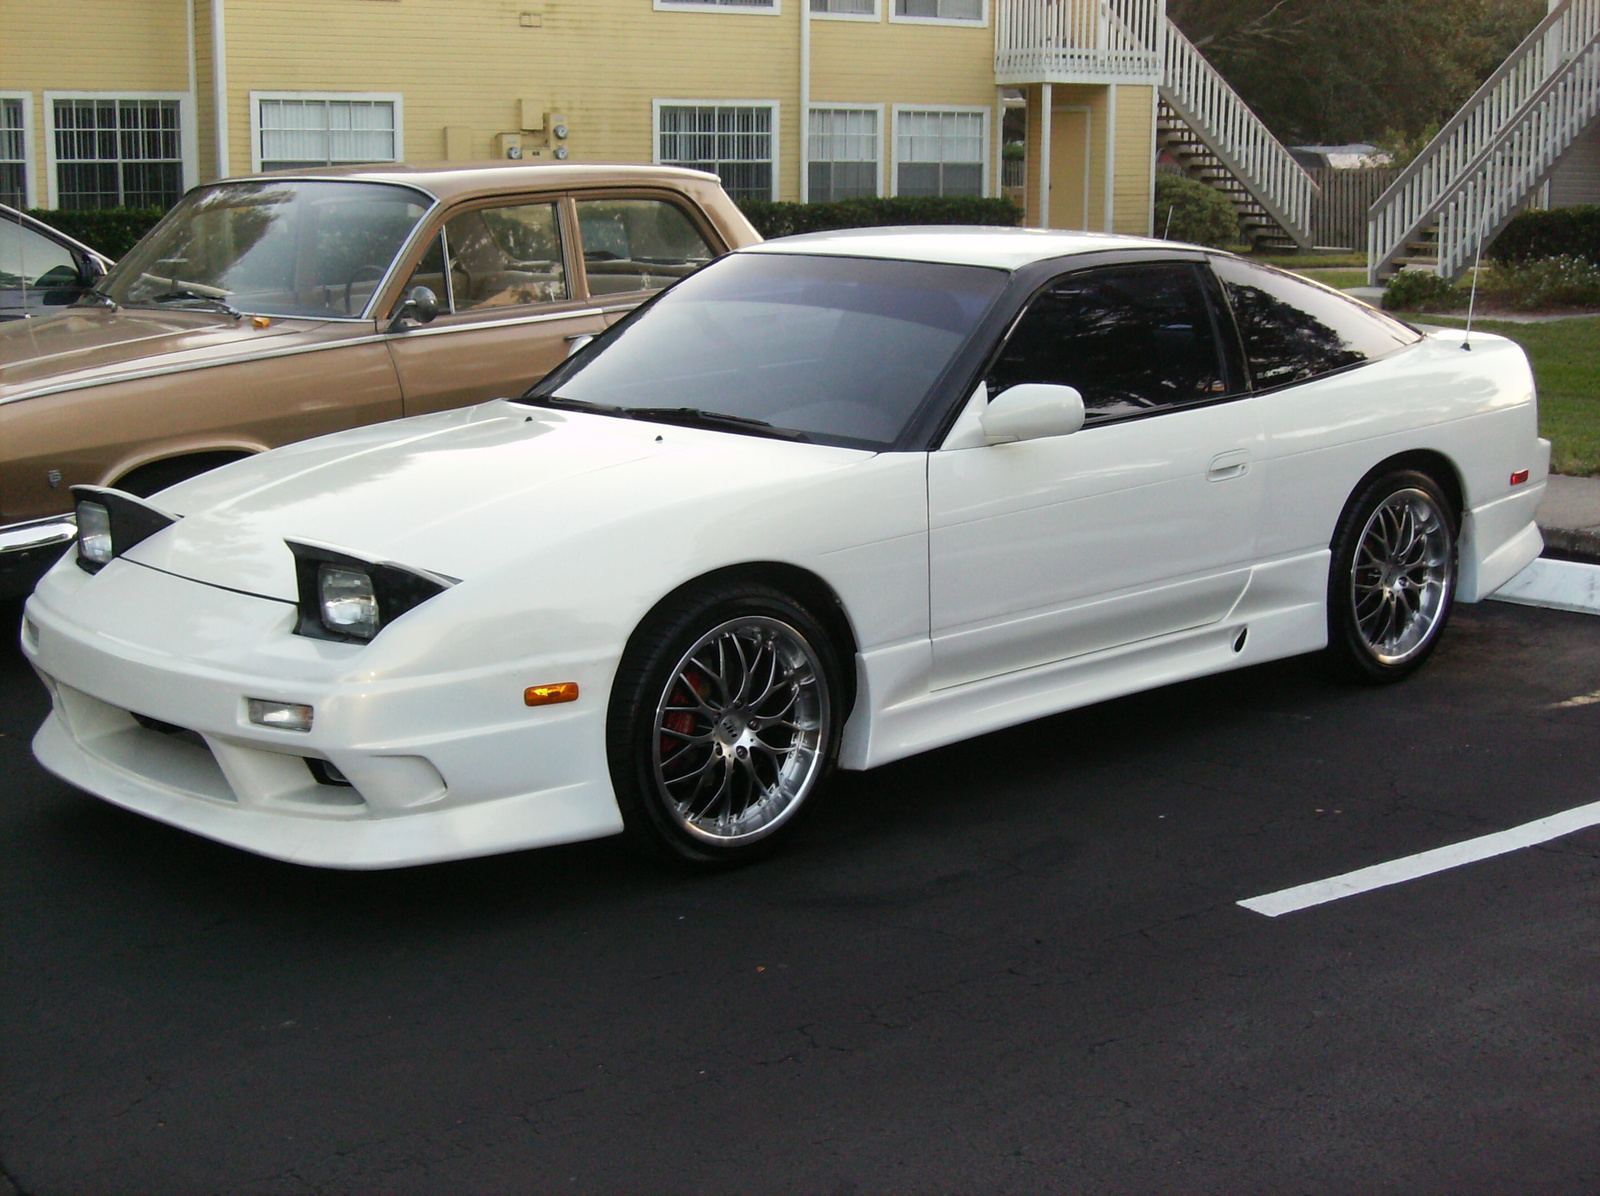 Picture of a 1992 nissan 240sx